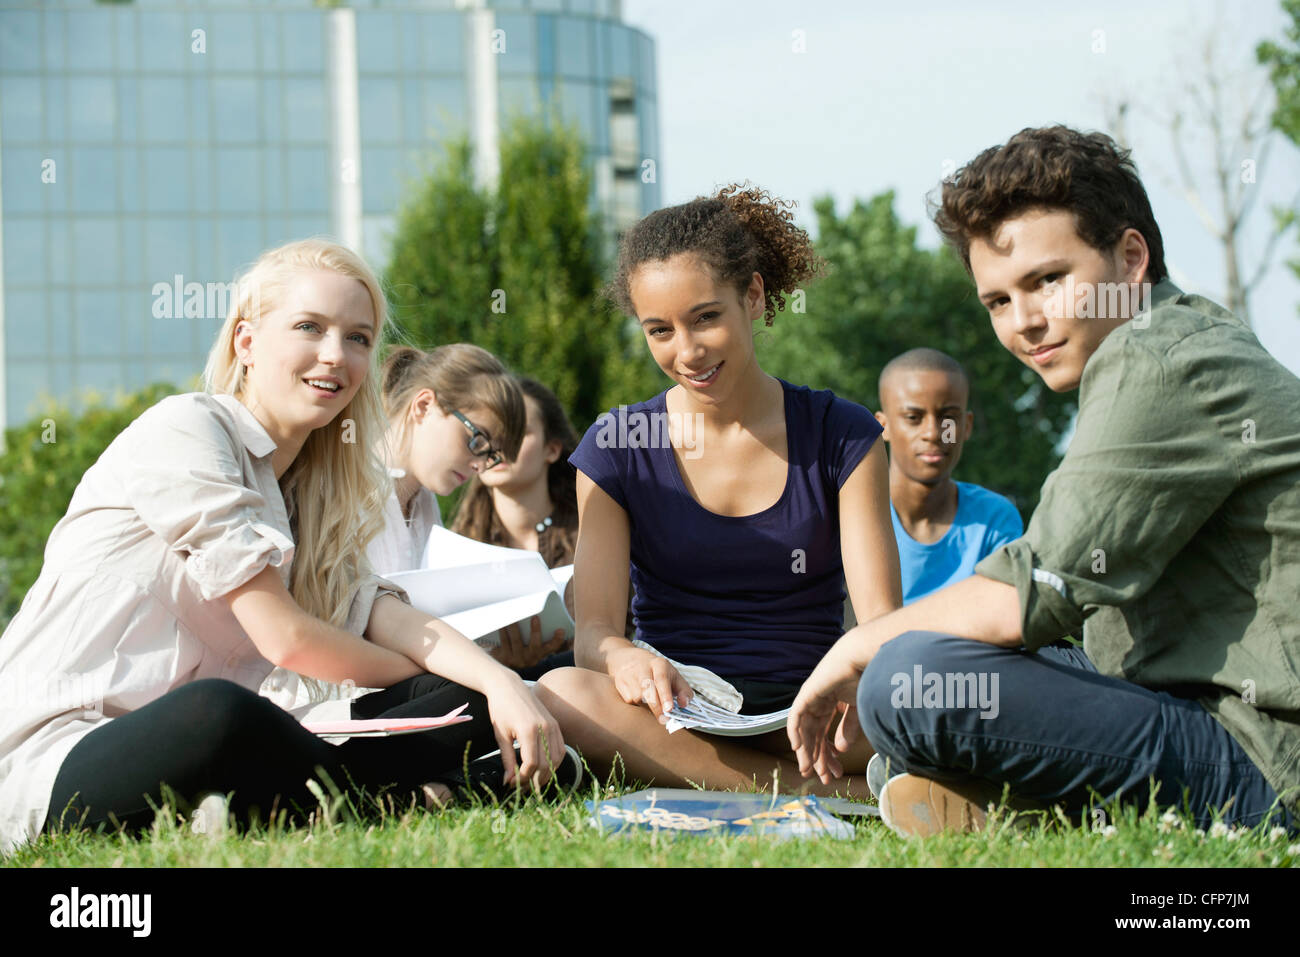 University students studying together outdoors on grass, focus on one woman Stock Photo